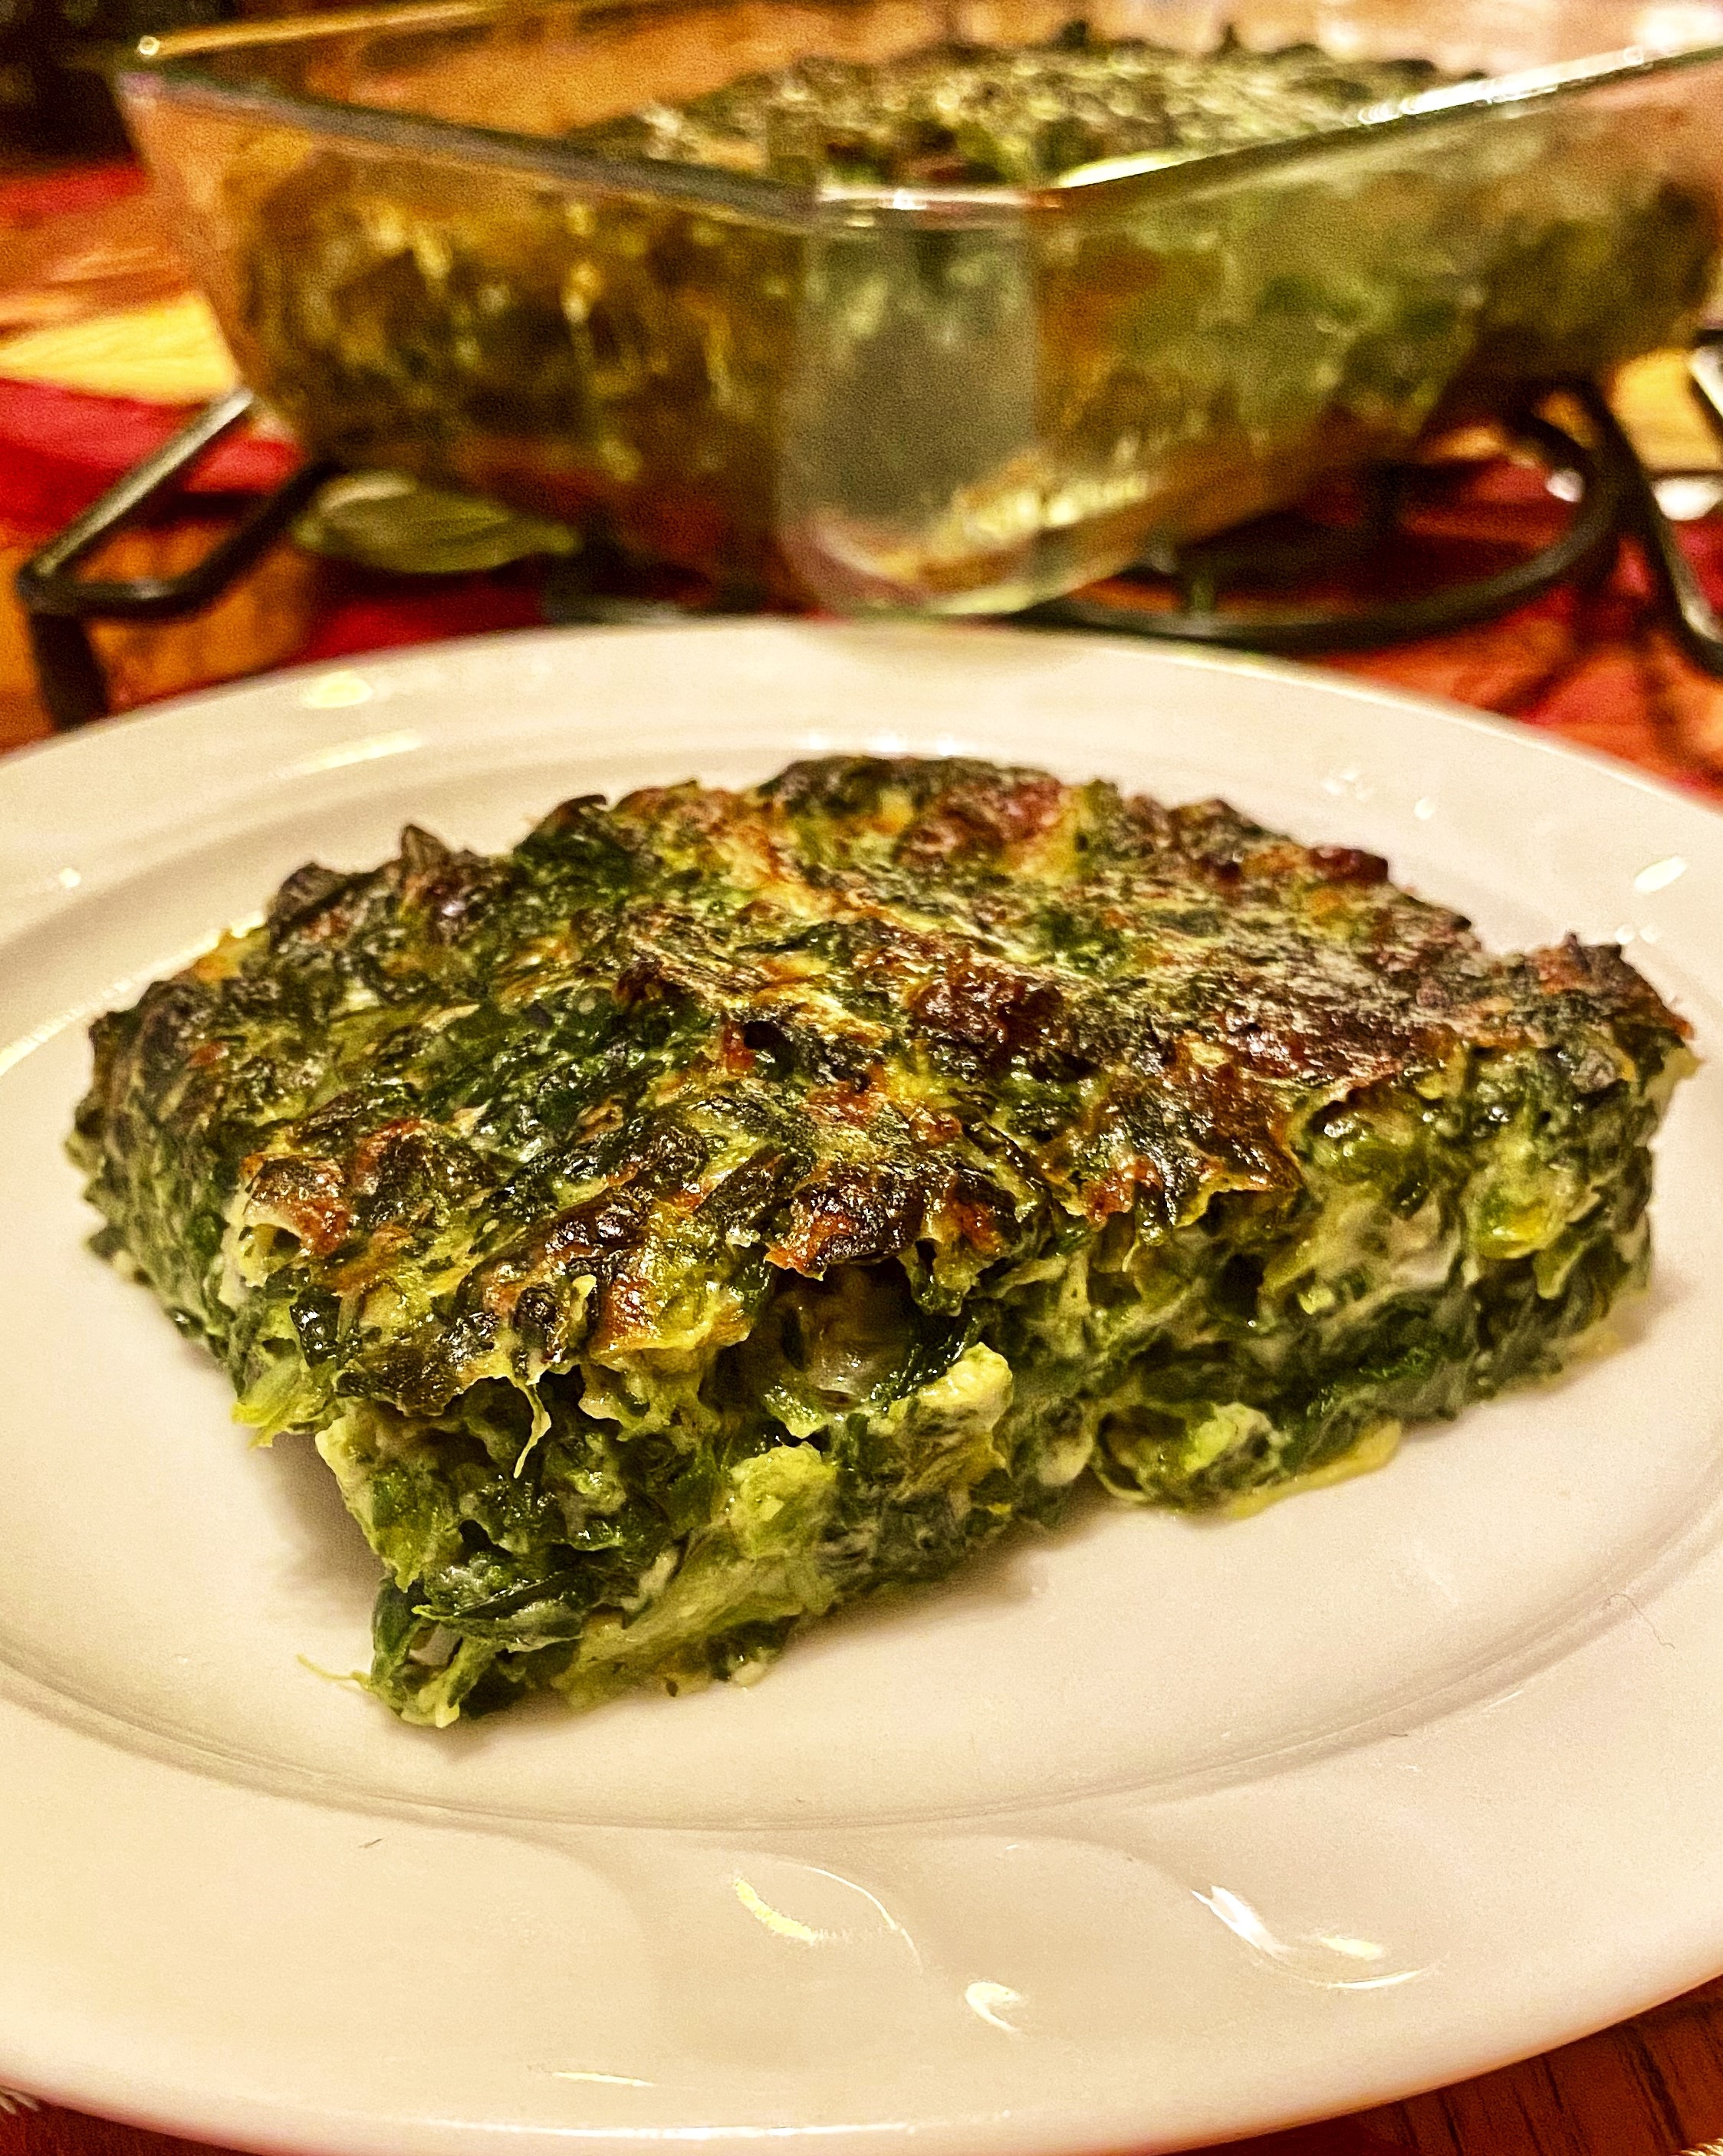 Cheesy Spinach Squares